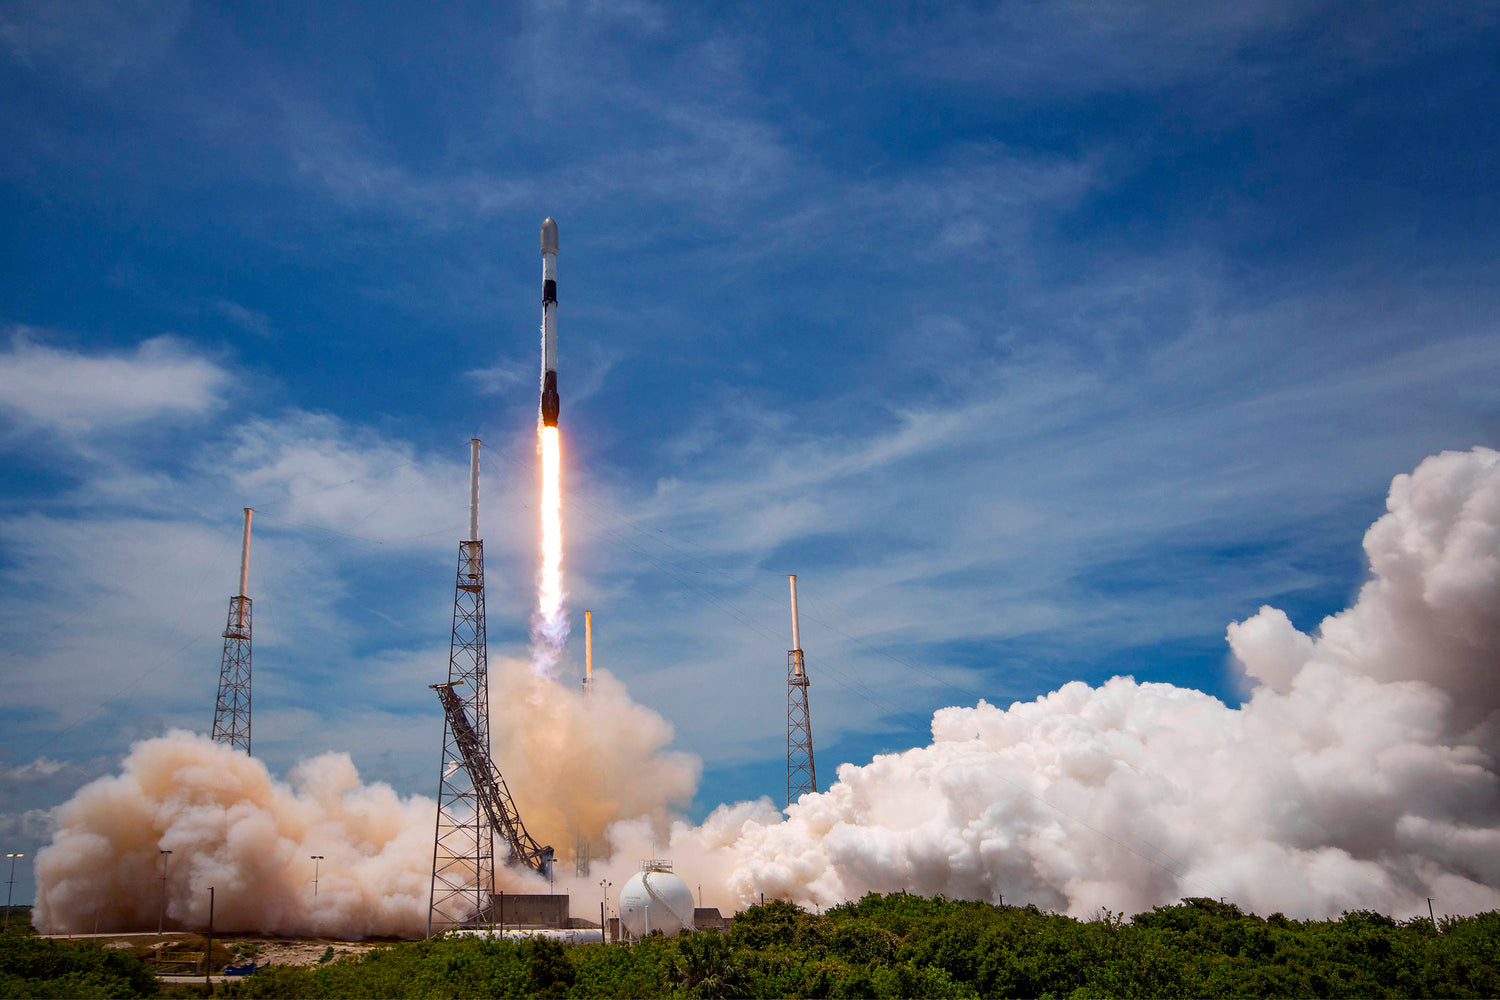 SpaceX Transporter-5 Rideshare Mission launches 59 spacecraft to orbit, including cremated remains of 47 people